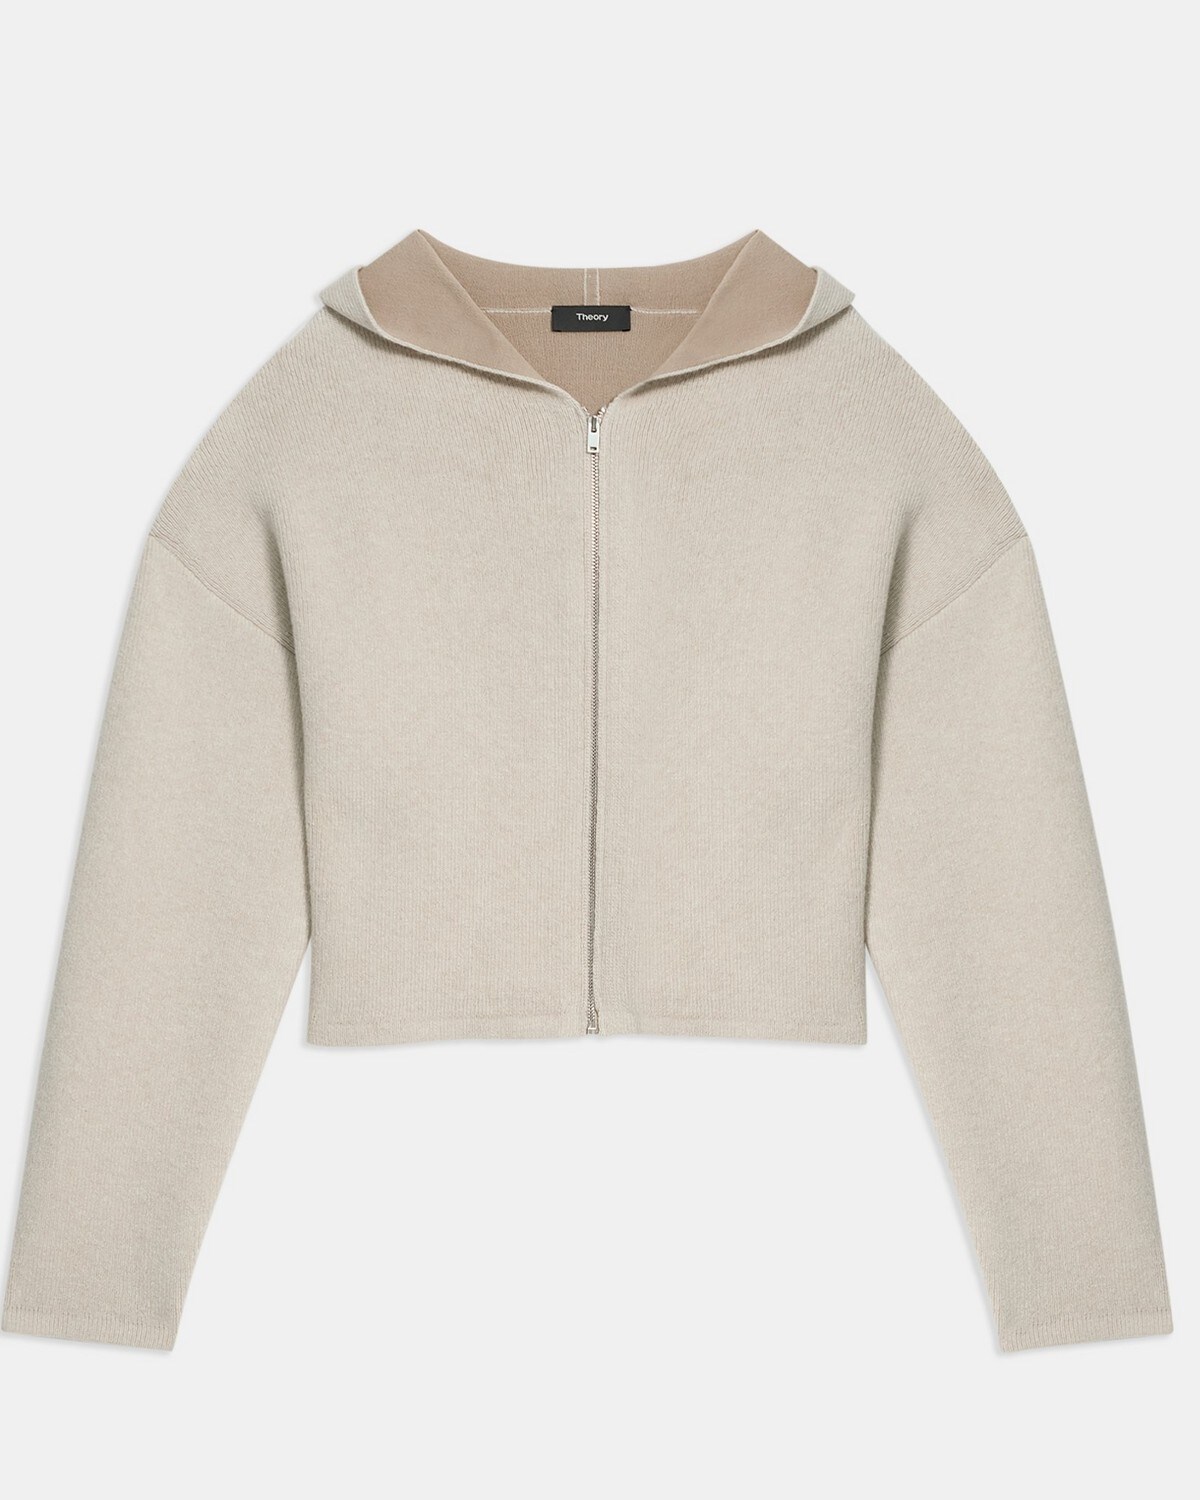 Cropped Hoodie in Felted Wool-Cashmere